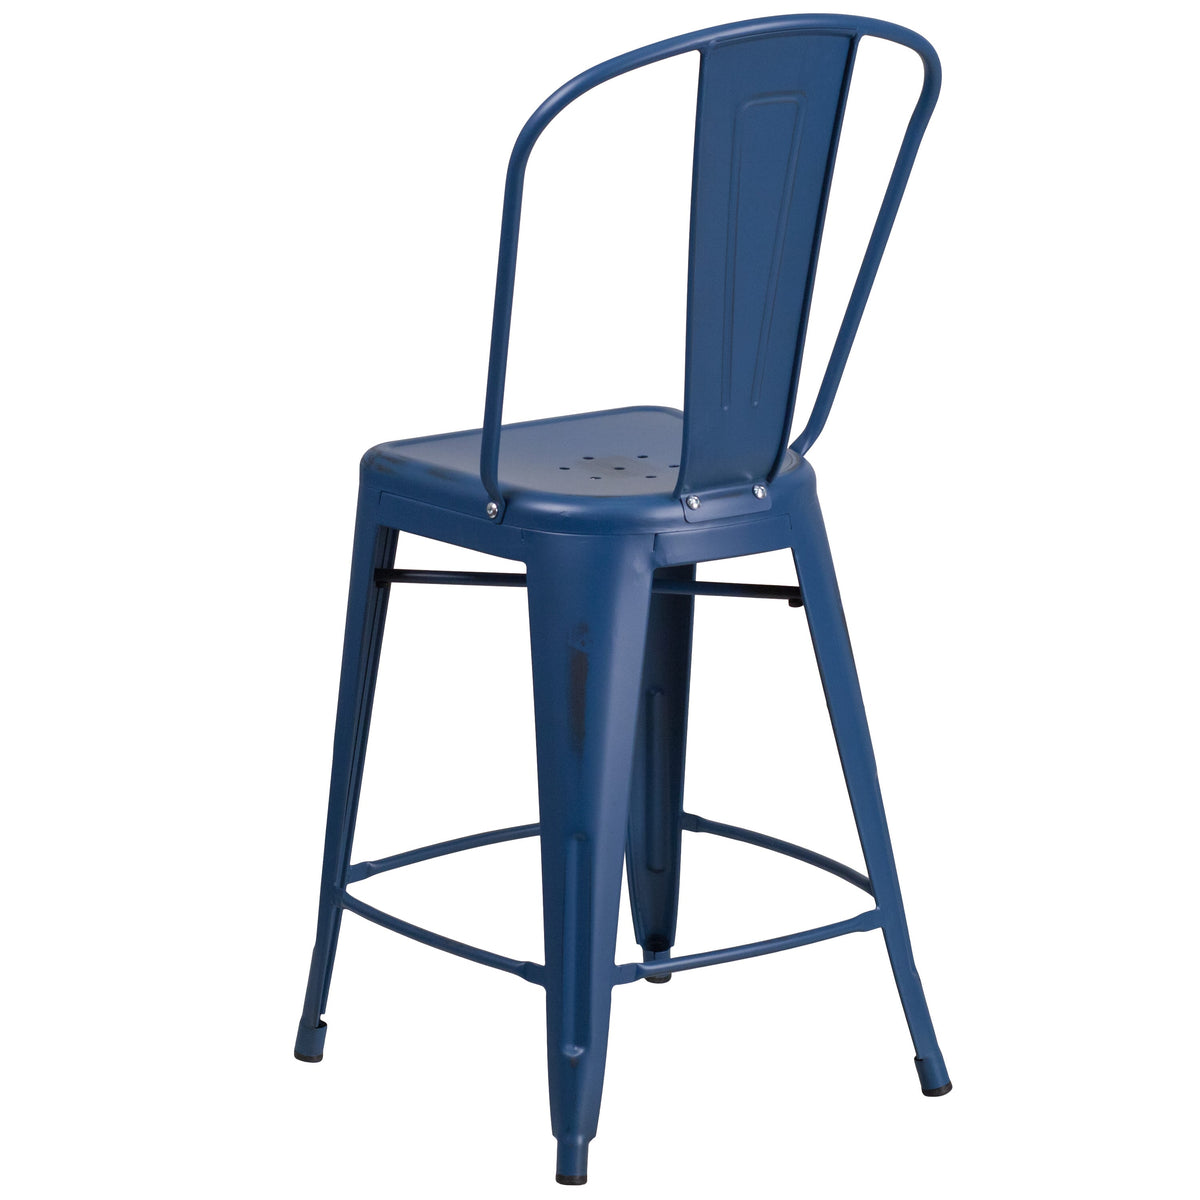 Antique Blue |#| 24inch High Distressed Aged Blue Metal Indoor-Outdoor Counter Height Stool w/ Back